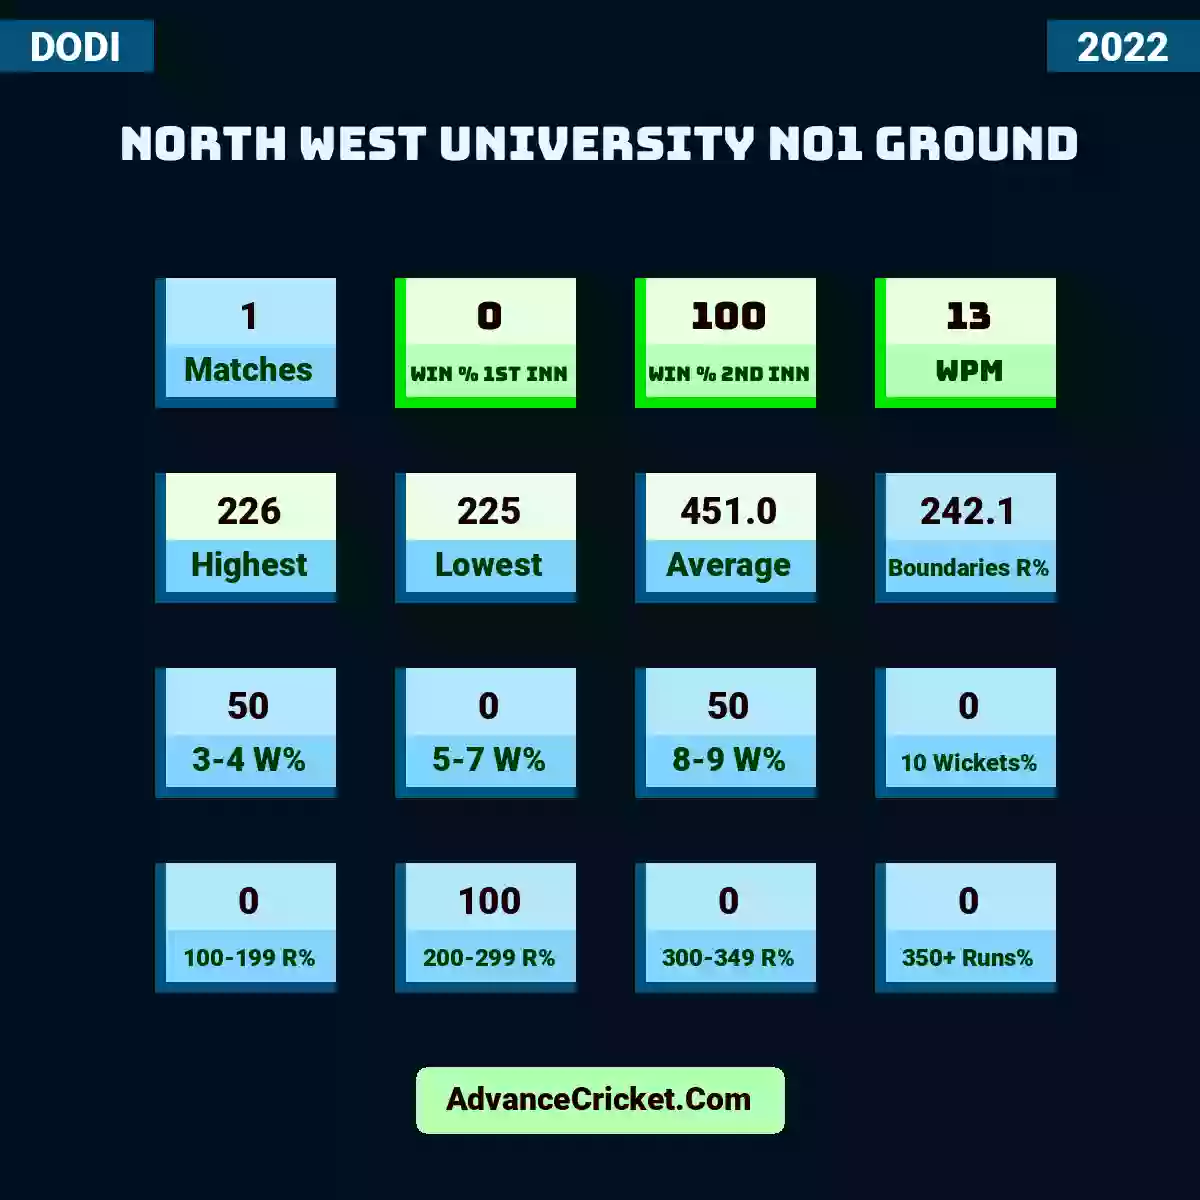 Image showing North West University No1 Ground with Matches: 1, Win % 1st Inn: 0, Win % 2nd Inn: 100, WPM: 13, Highest: 226, Lowest: 225, Average: 451.0, Boundaries R%: 242.1, 3-4 W%: 50, 5-7 W%: 0, 8-9 W%: 50, 10 Wickets%: 0, 100-199 R%: 0, 200-299 R%: 100, 300-349 R%: 0, 350+ Runs%: 0.